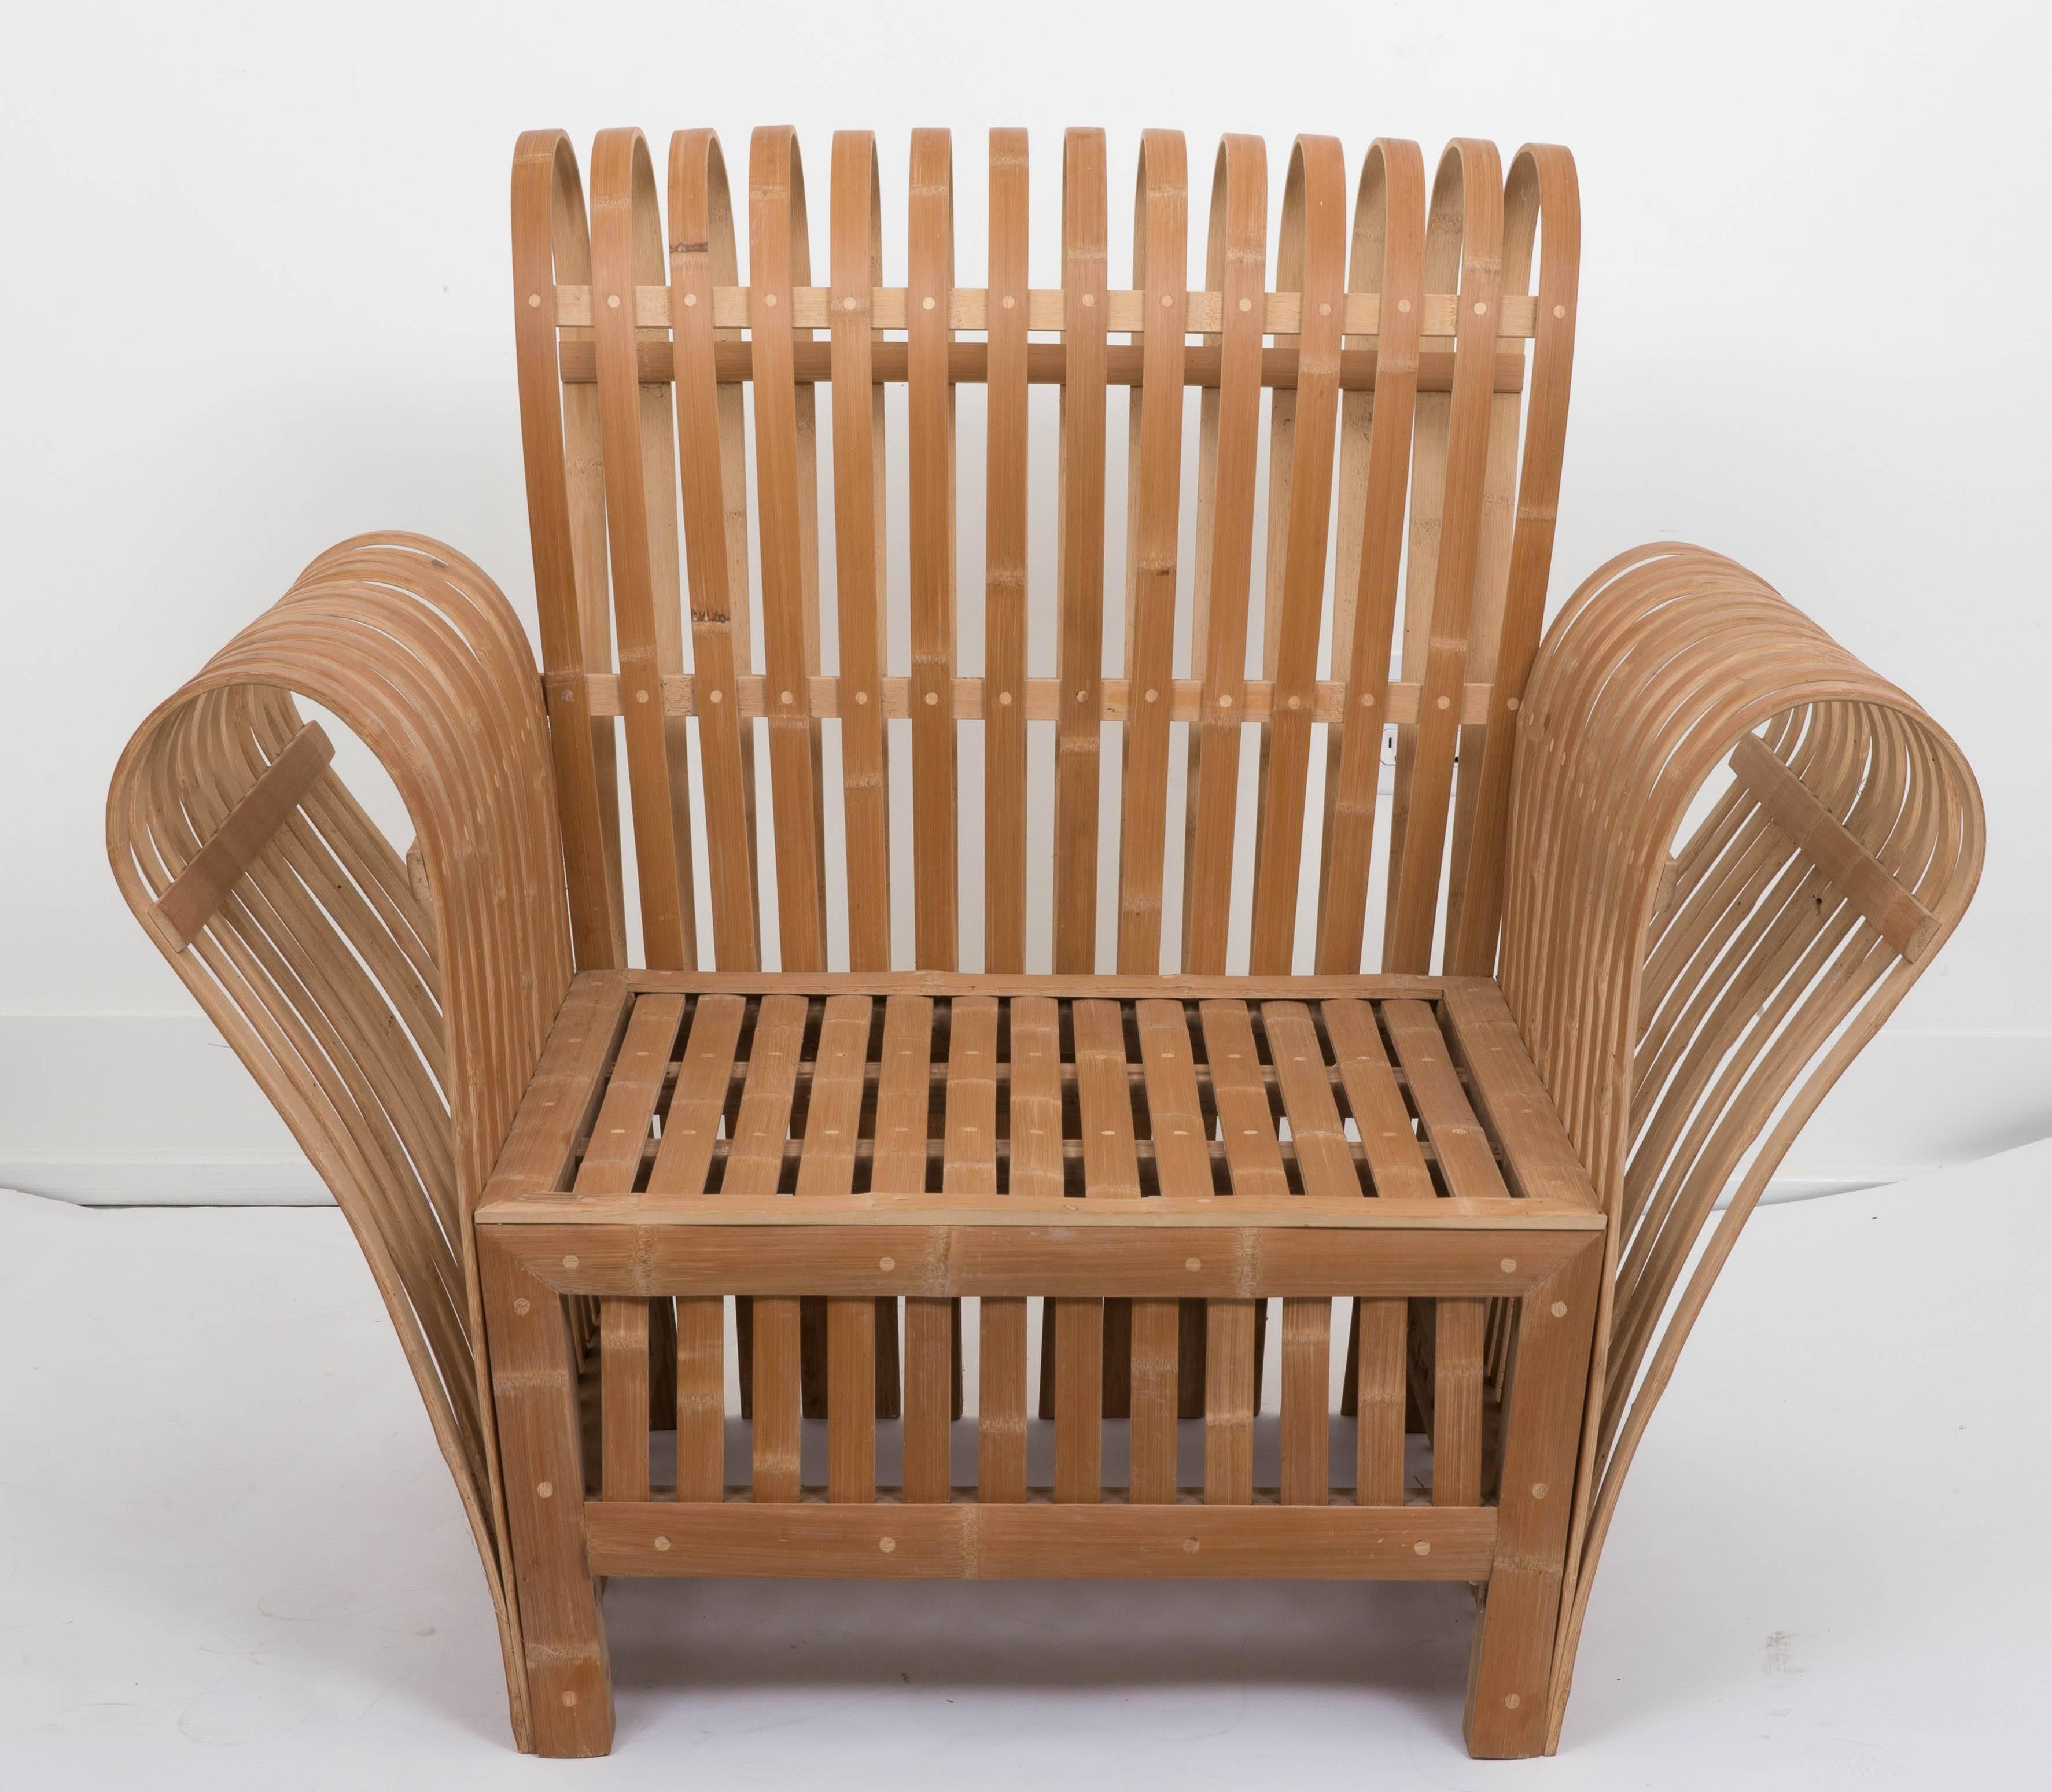 Molded bamboo lounge chair in the style of Jeff Dah-Yue Sh.